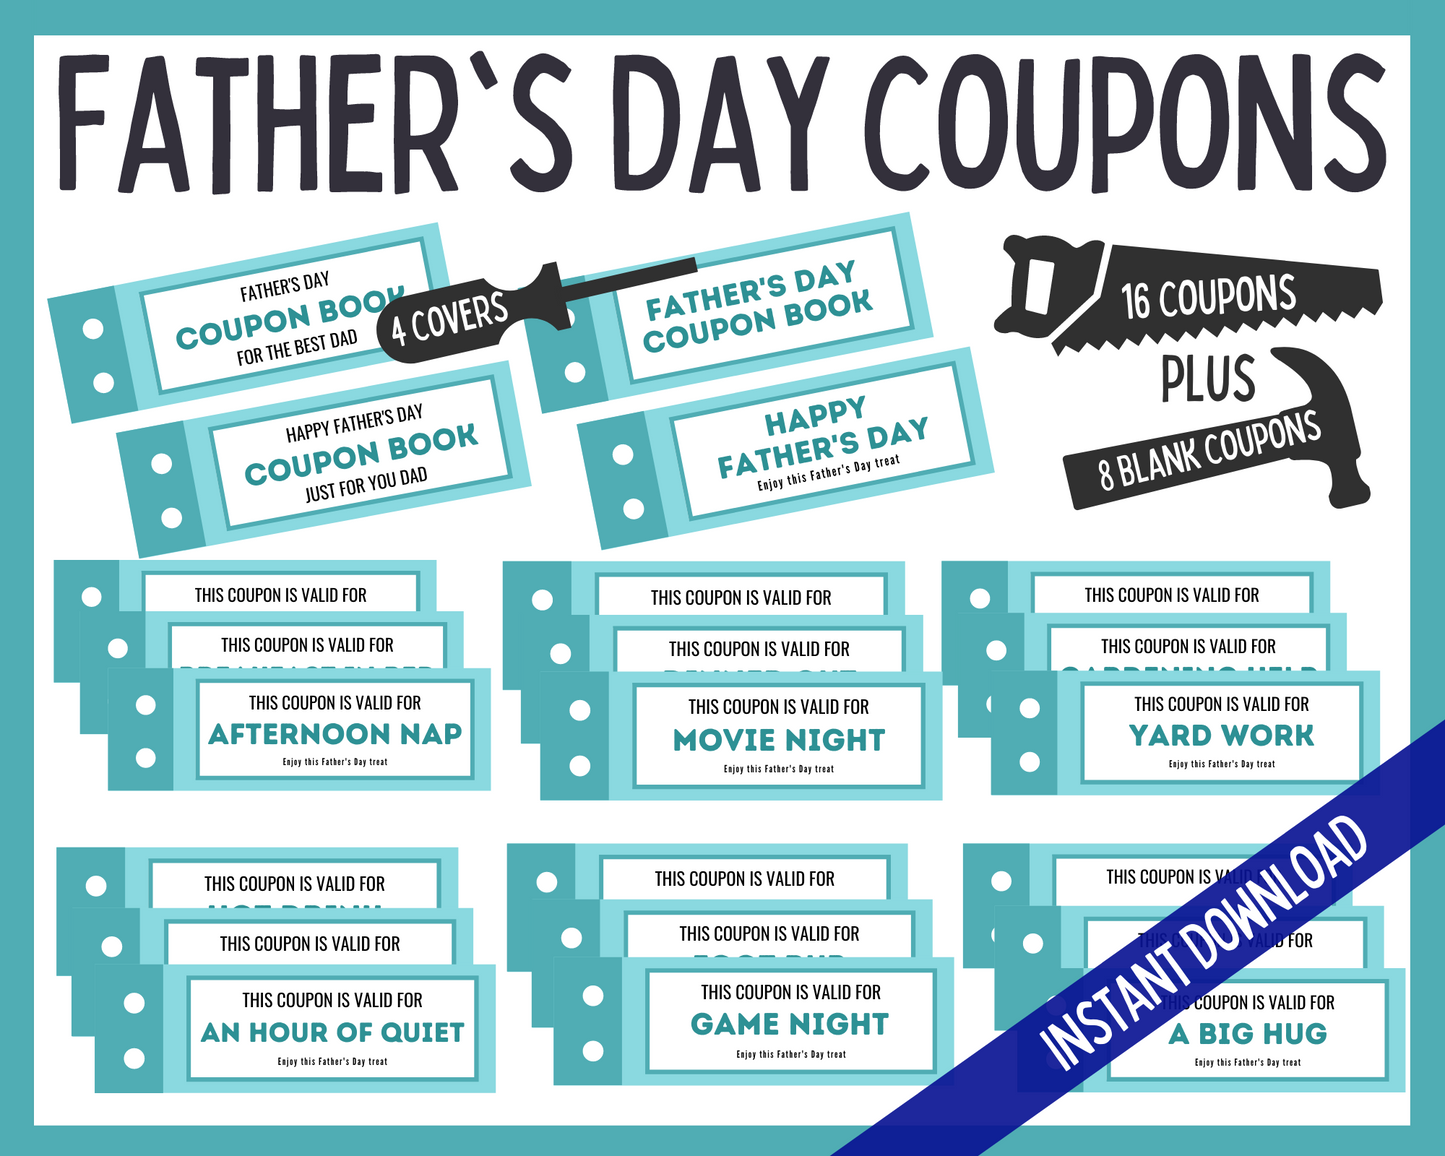 Fathers day coupons